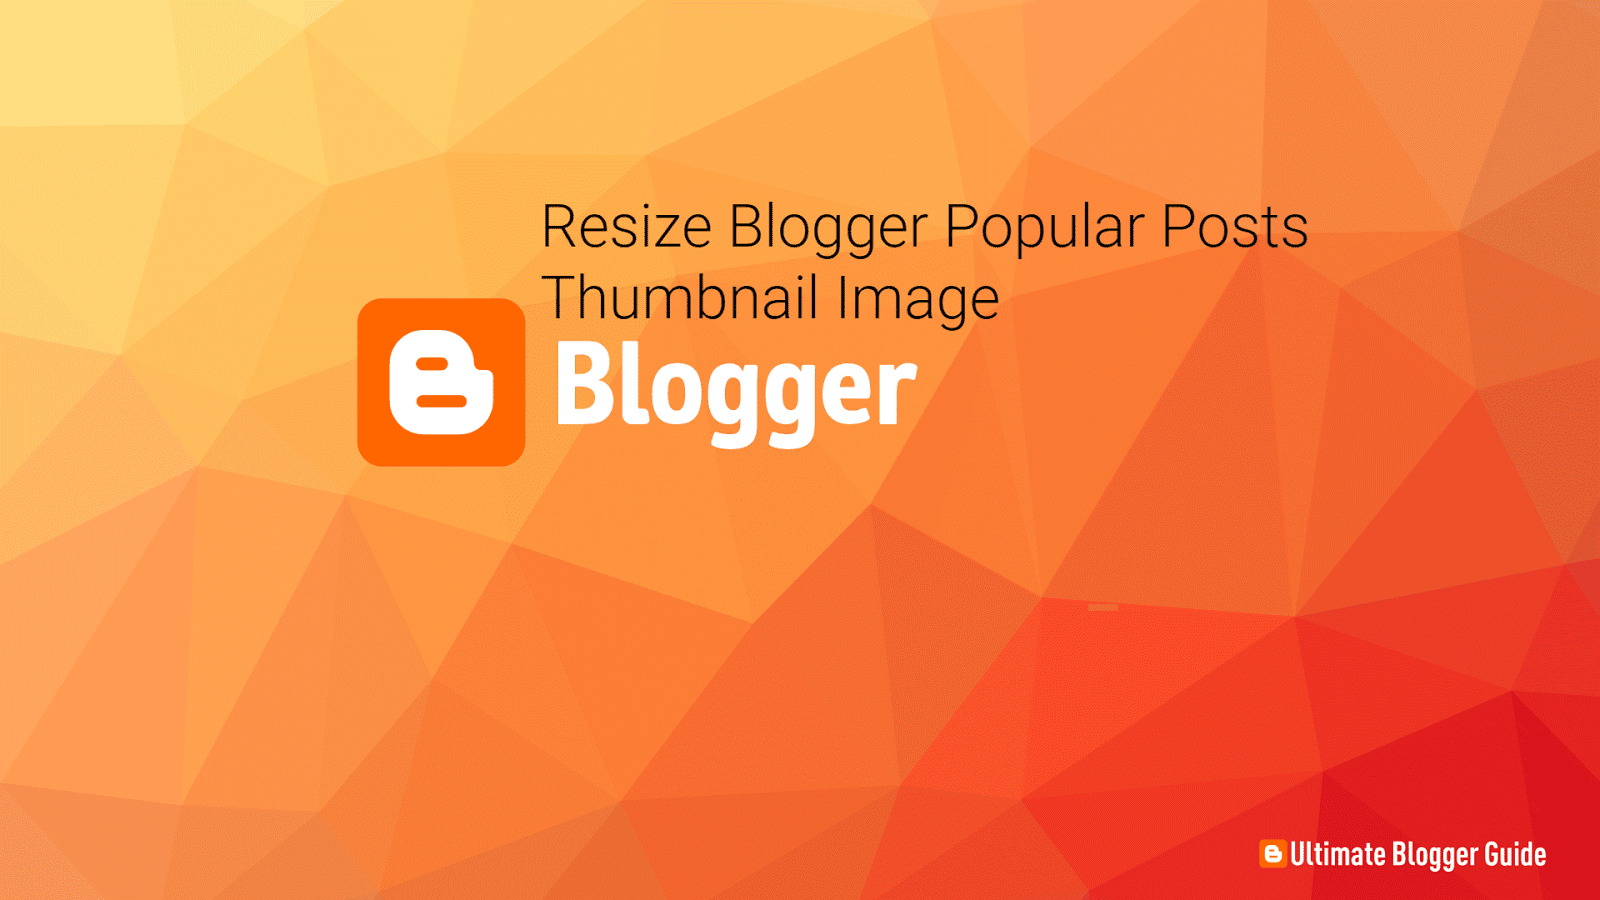 How to Resize Blogger Popular Posts Thumbnail Image - Ultimate Blogger Guide